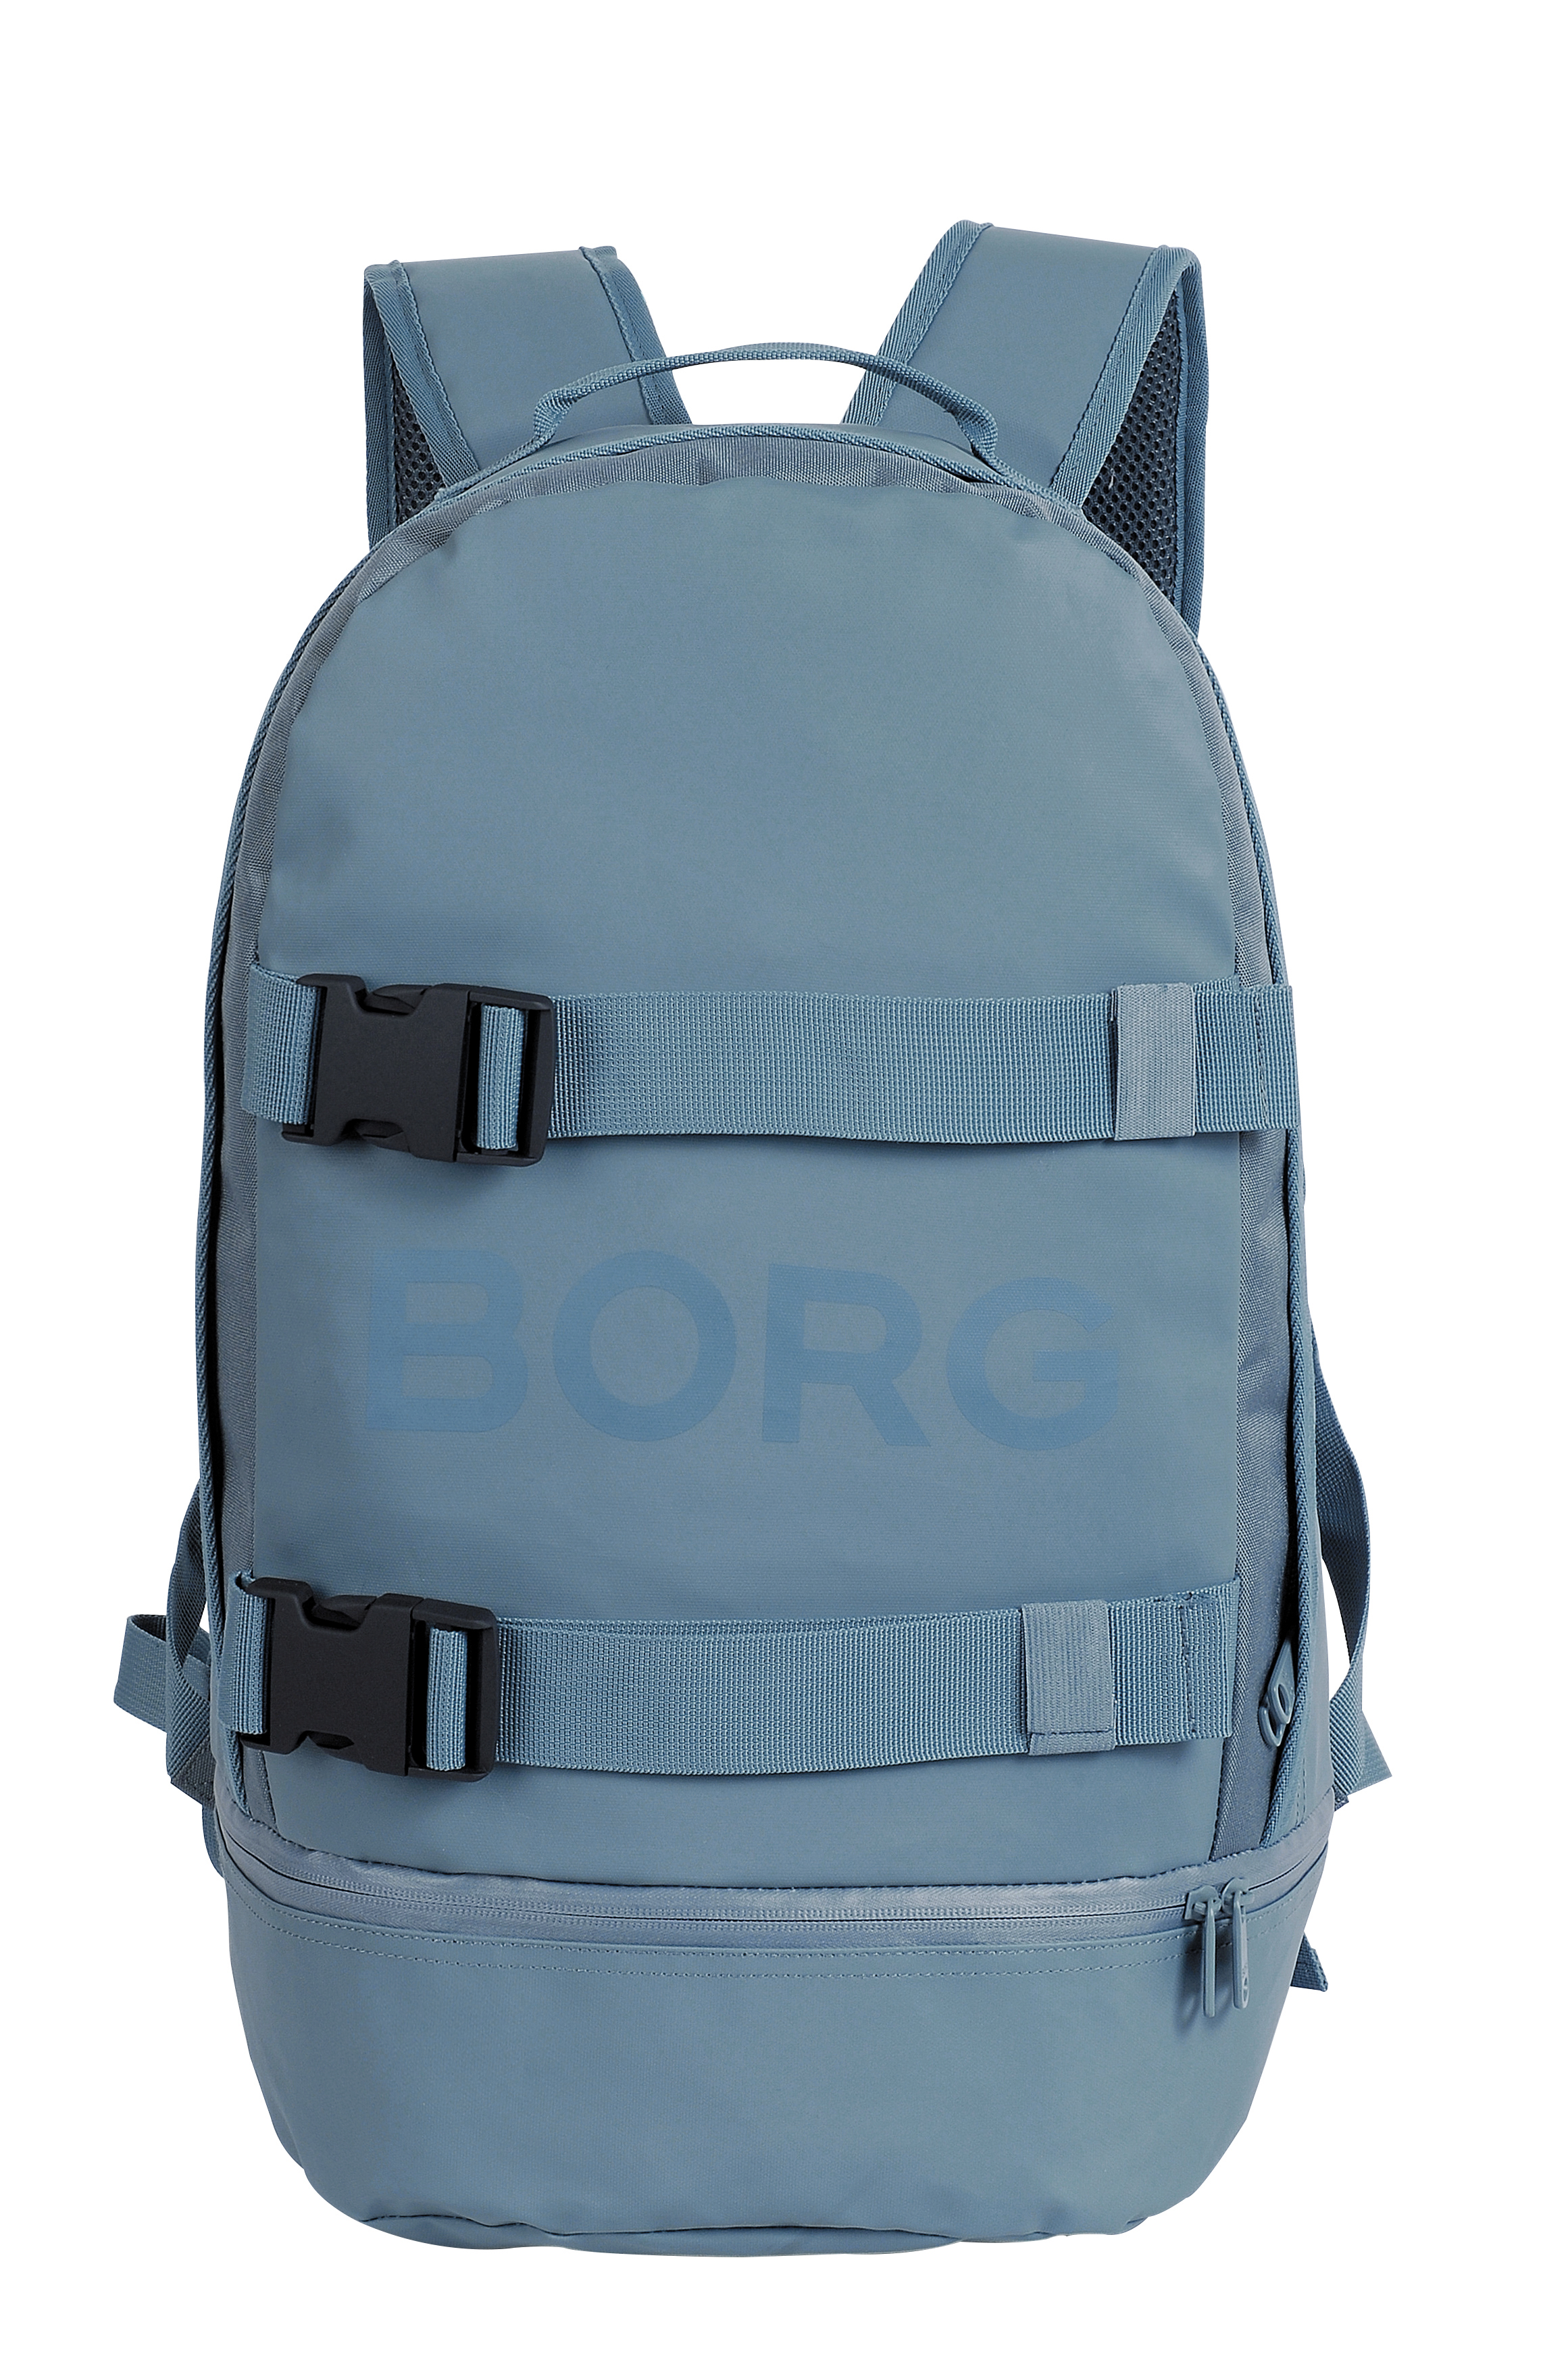 Björn Borg Borg Duffle Backpack Stormy Weather